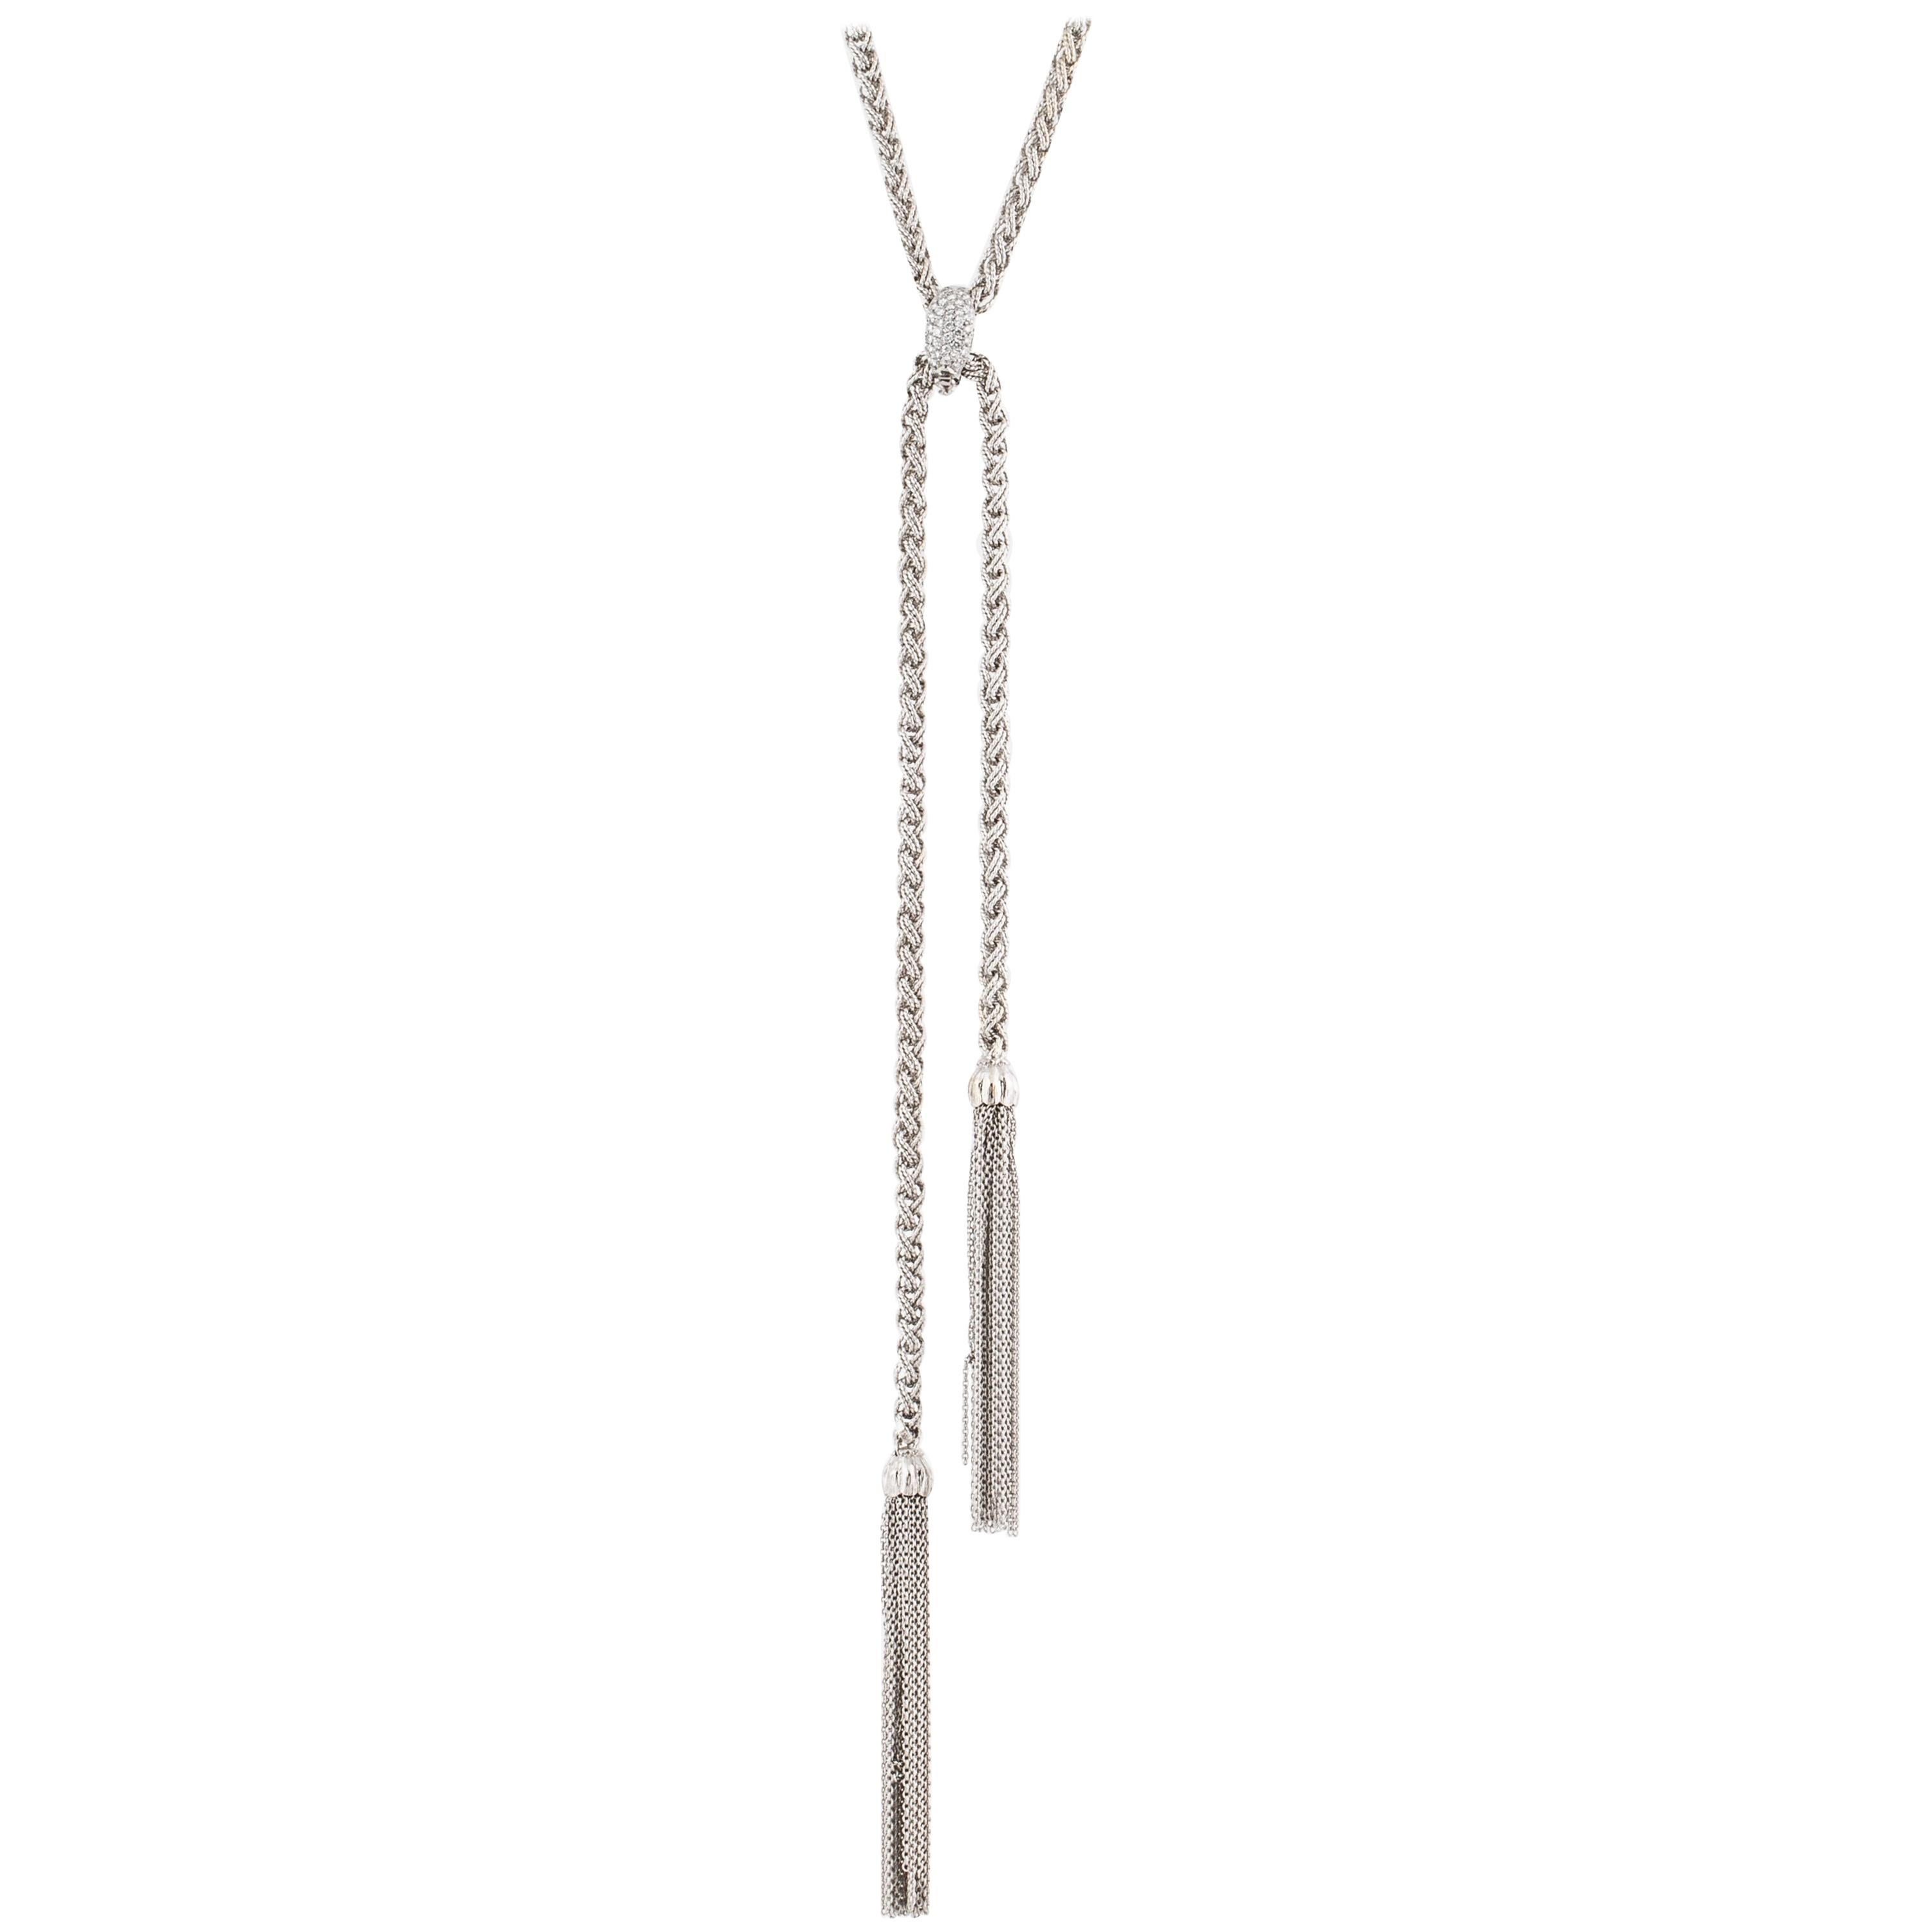 18K White Gold Necklace with Removable Tassels and Clasps